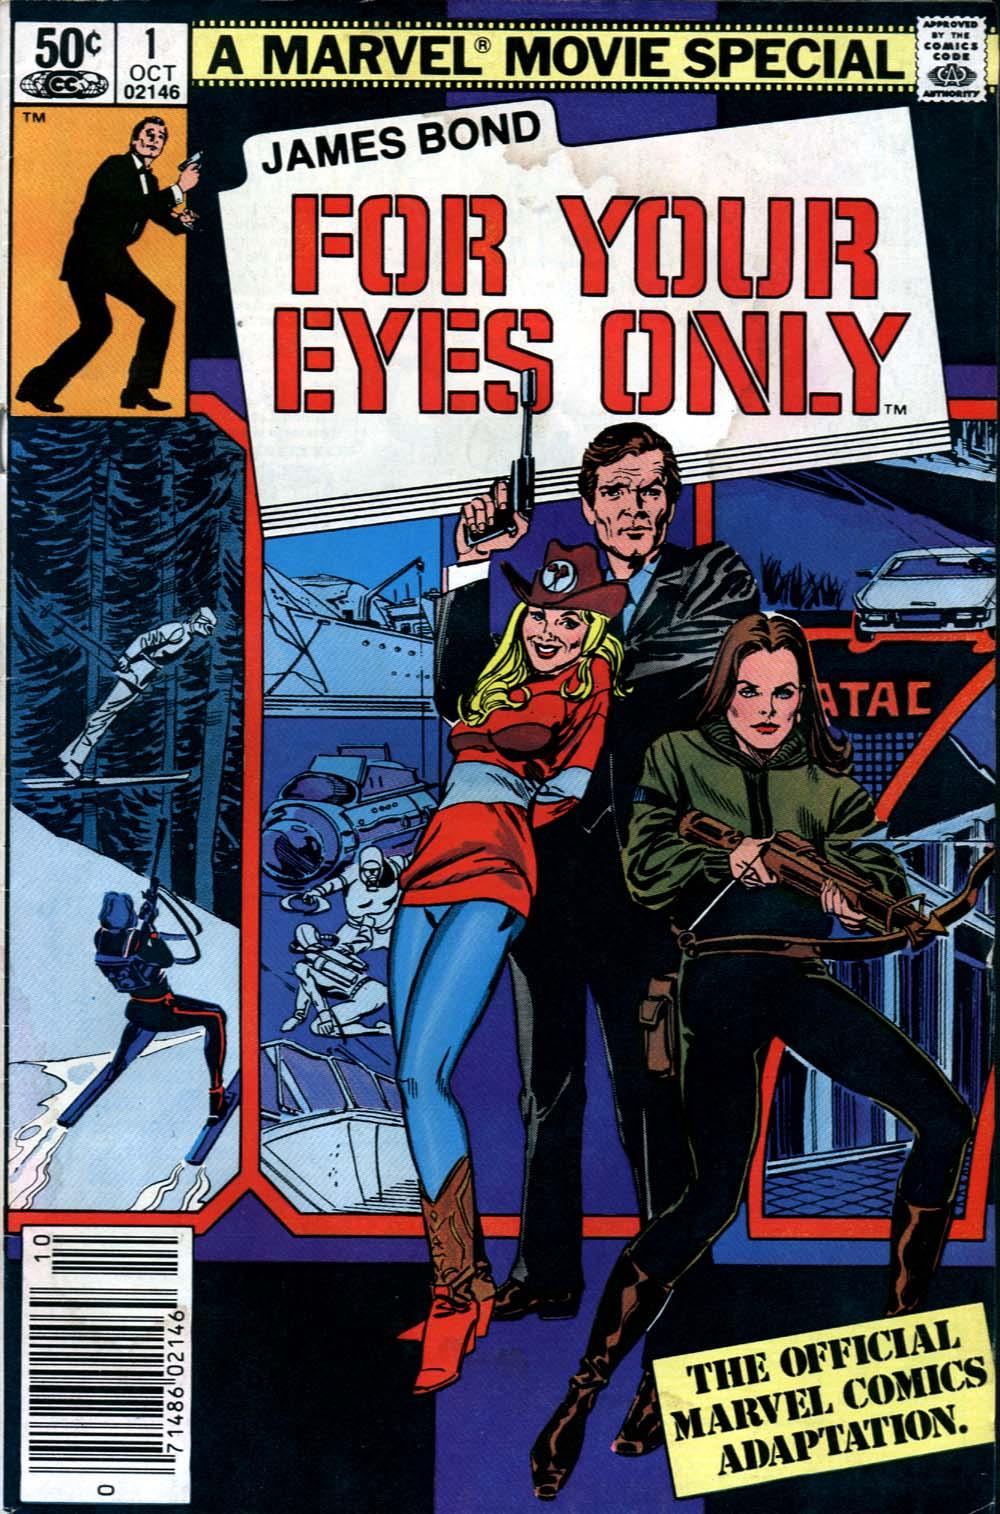 James Bond For Your Eyes Only Vol. 1 #1